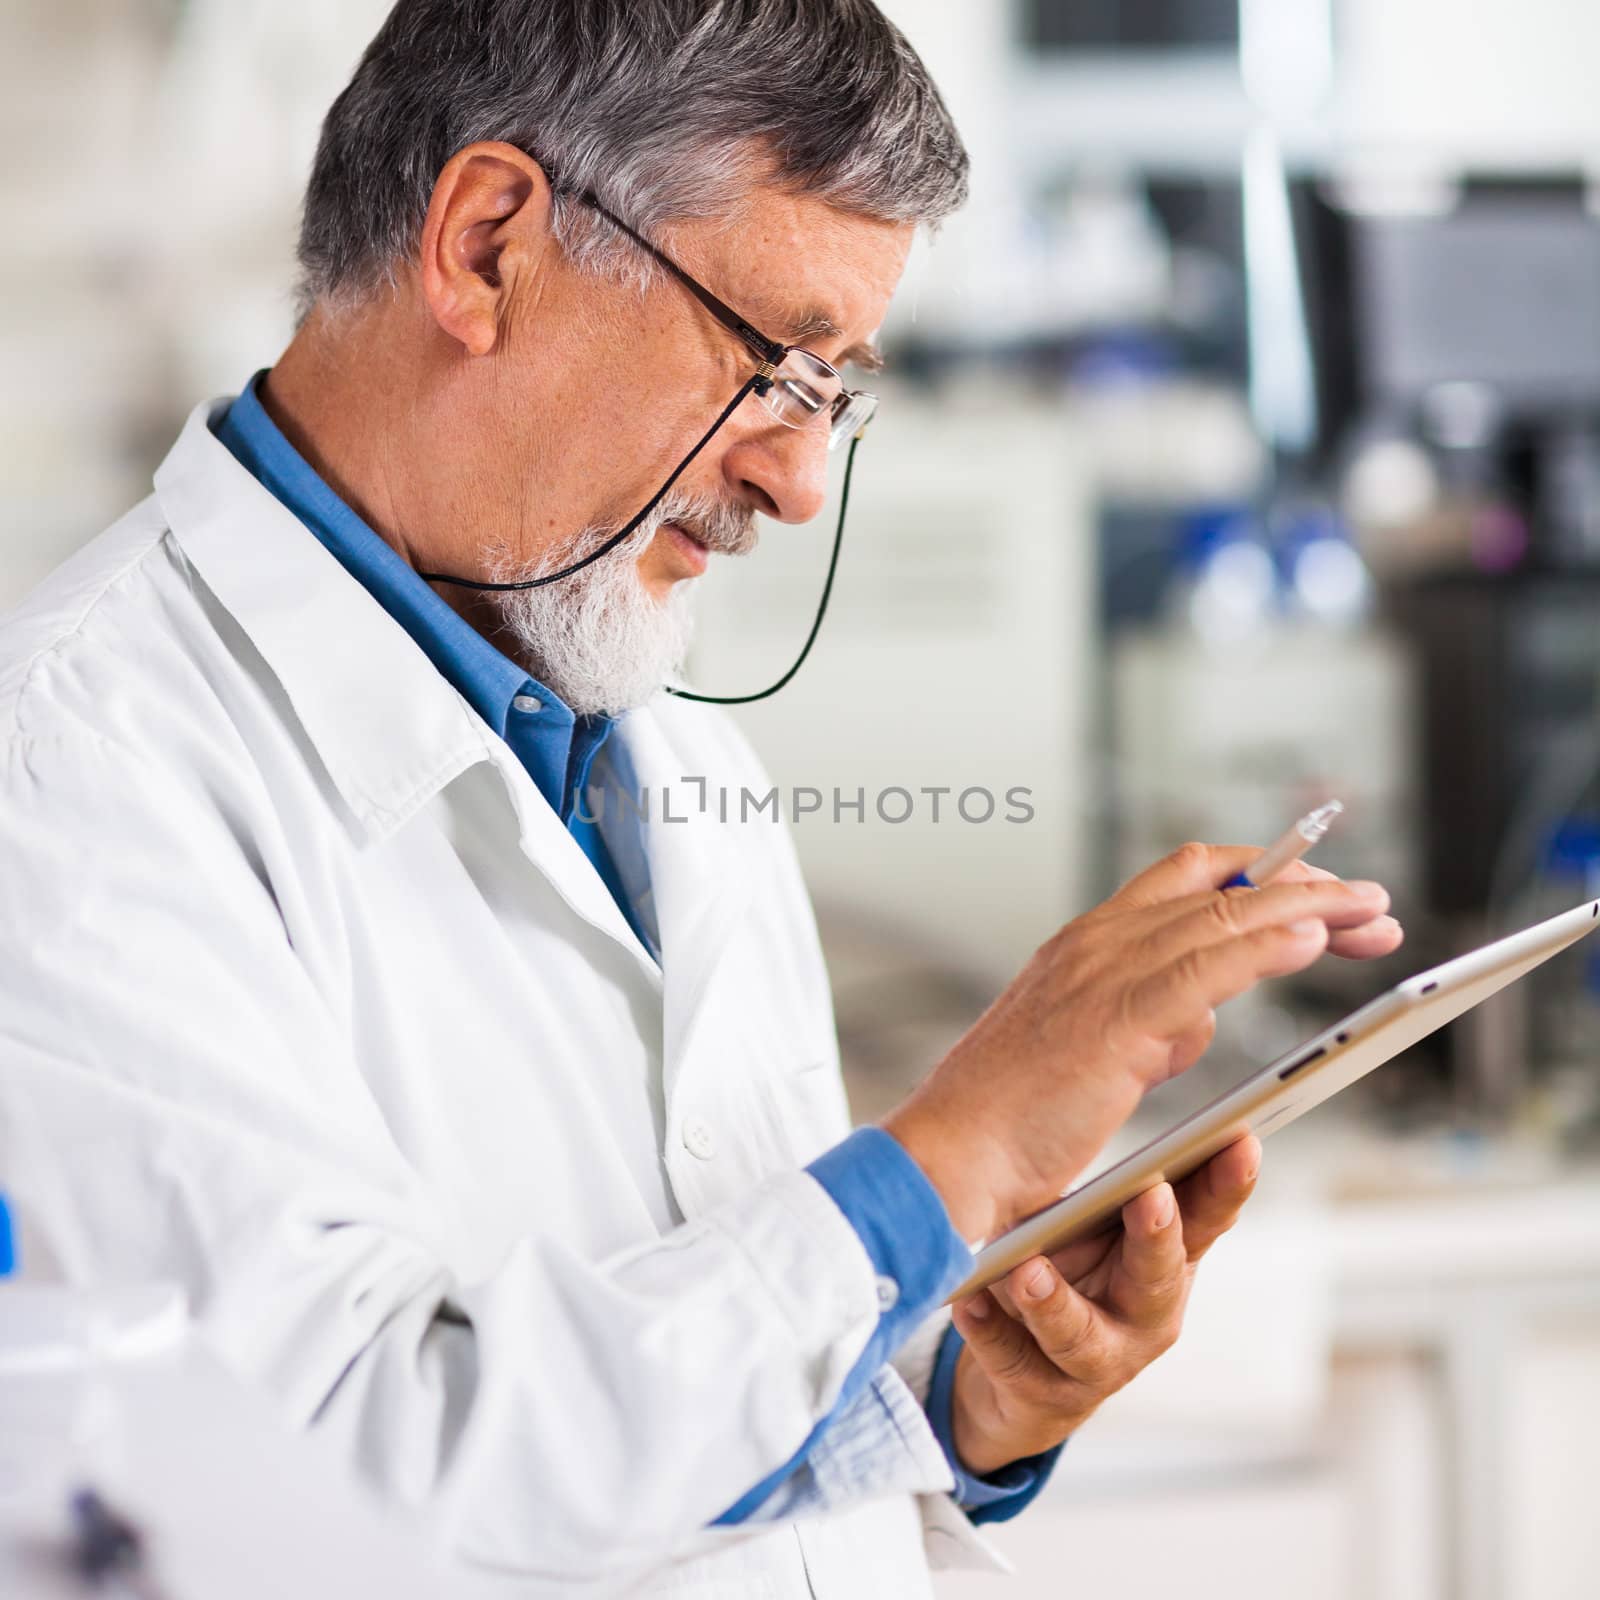 Senior doctor/scientist using his tablet computer at work (color toned image)